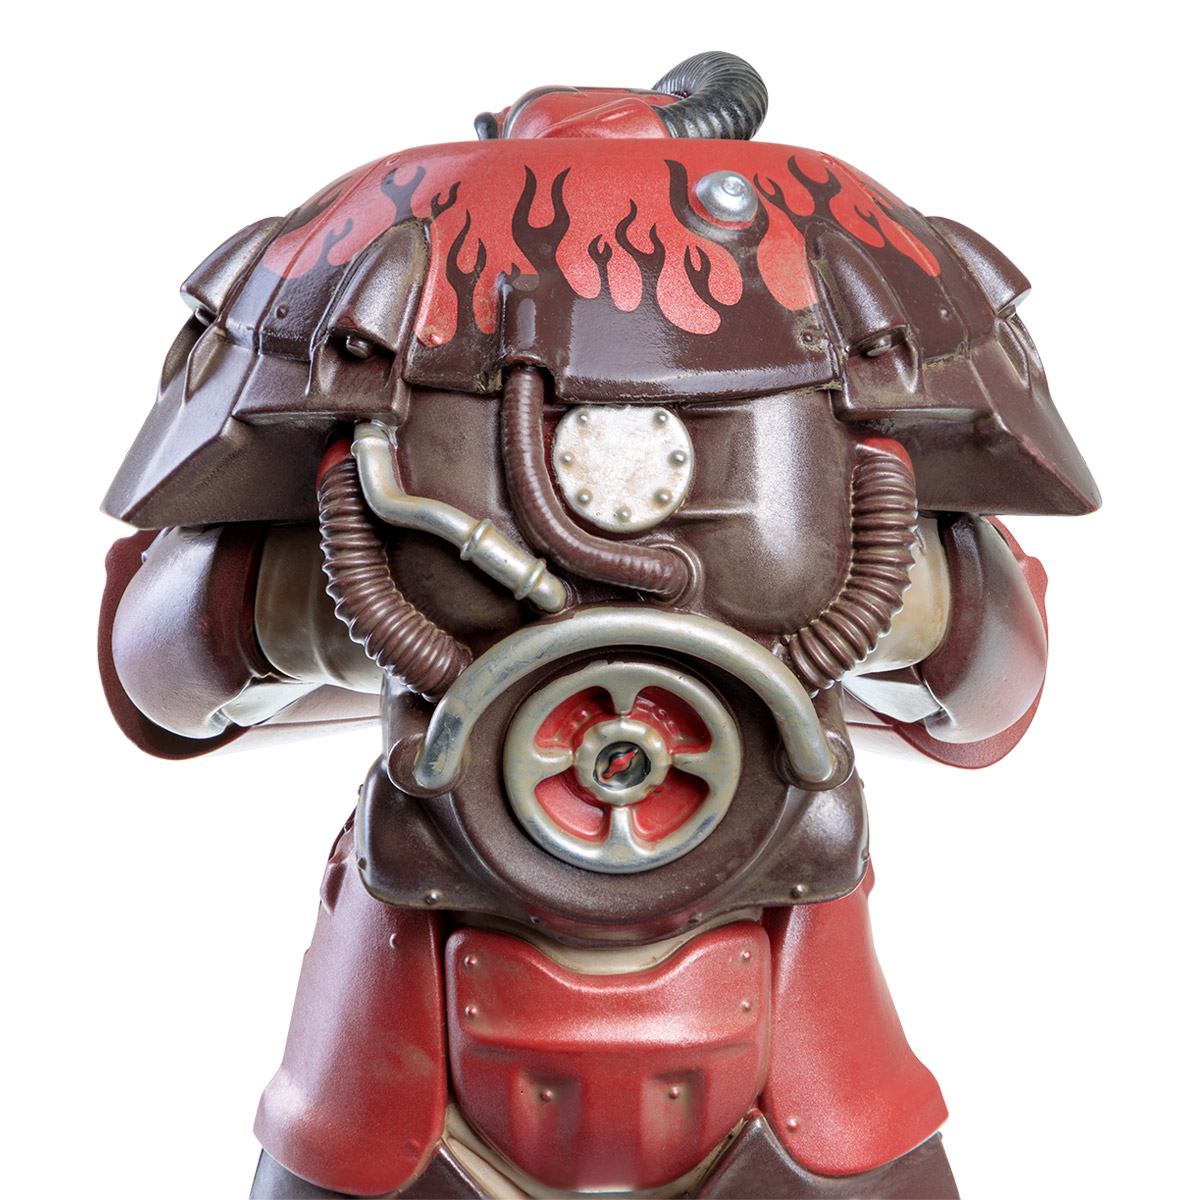 Fallout Power Armor Statue "Hot Rod Flames" Image 7